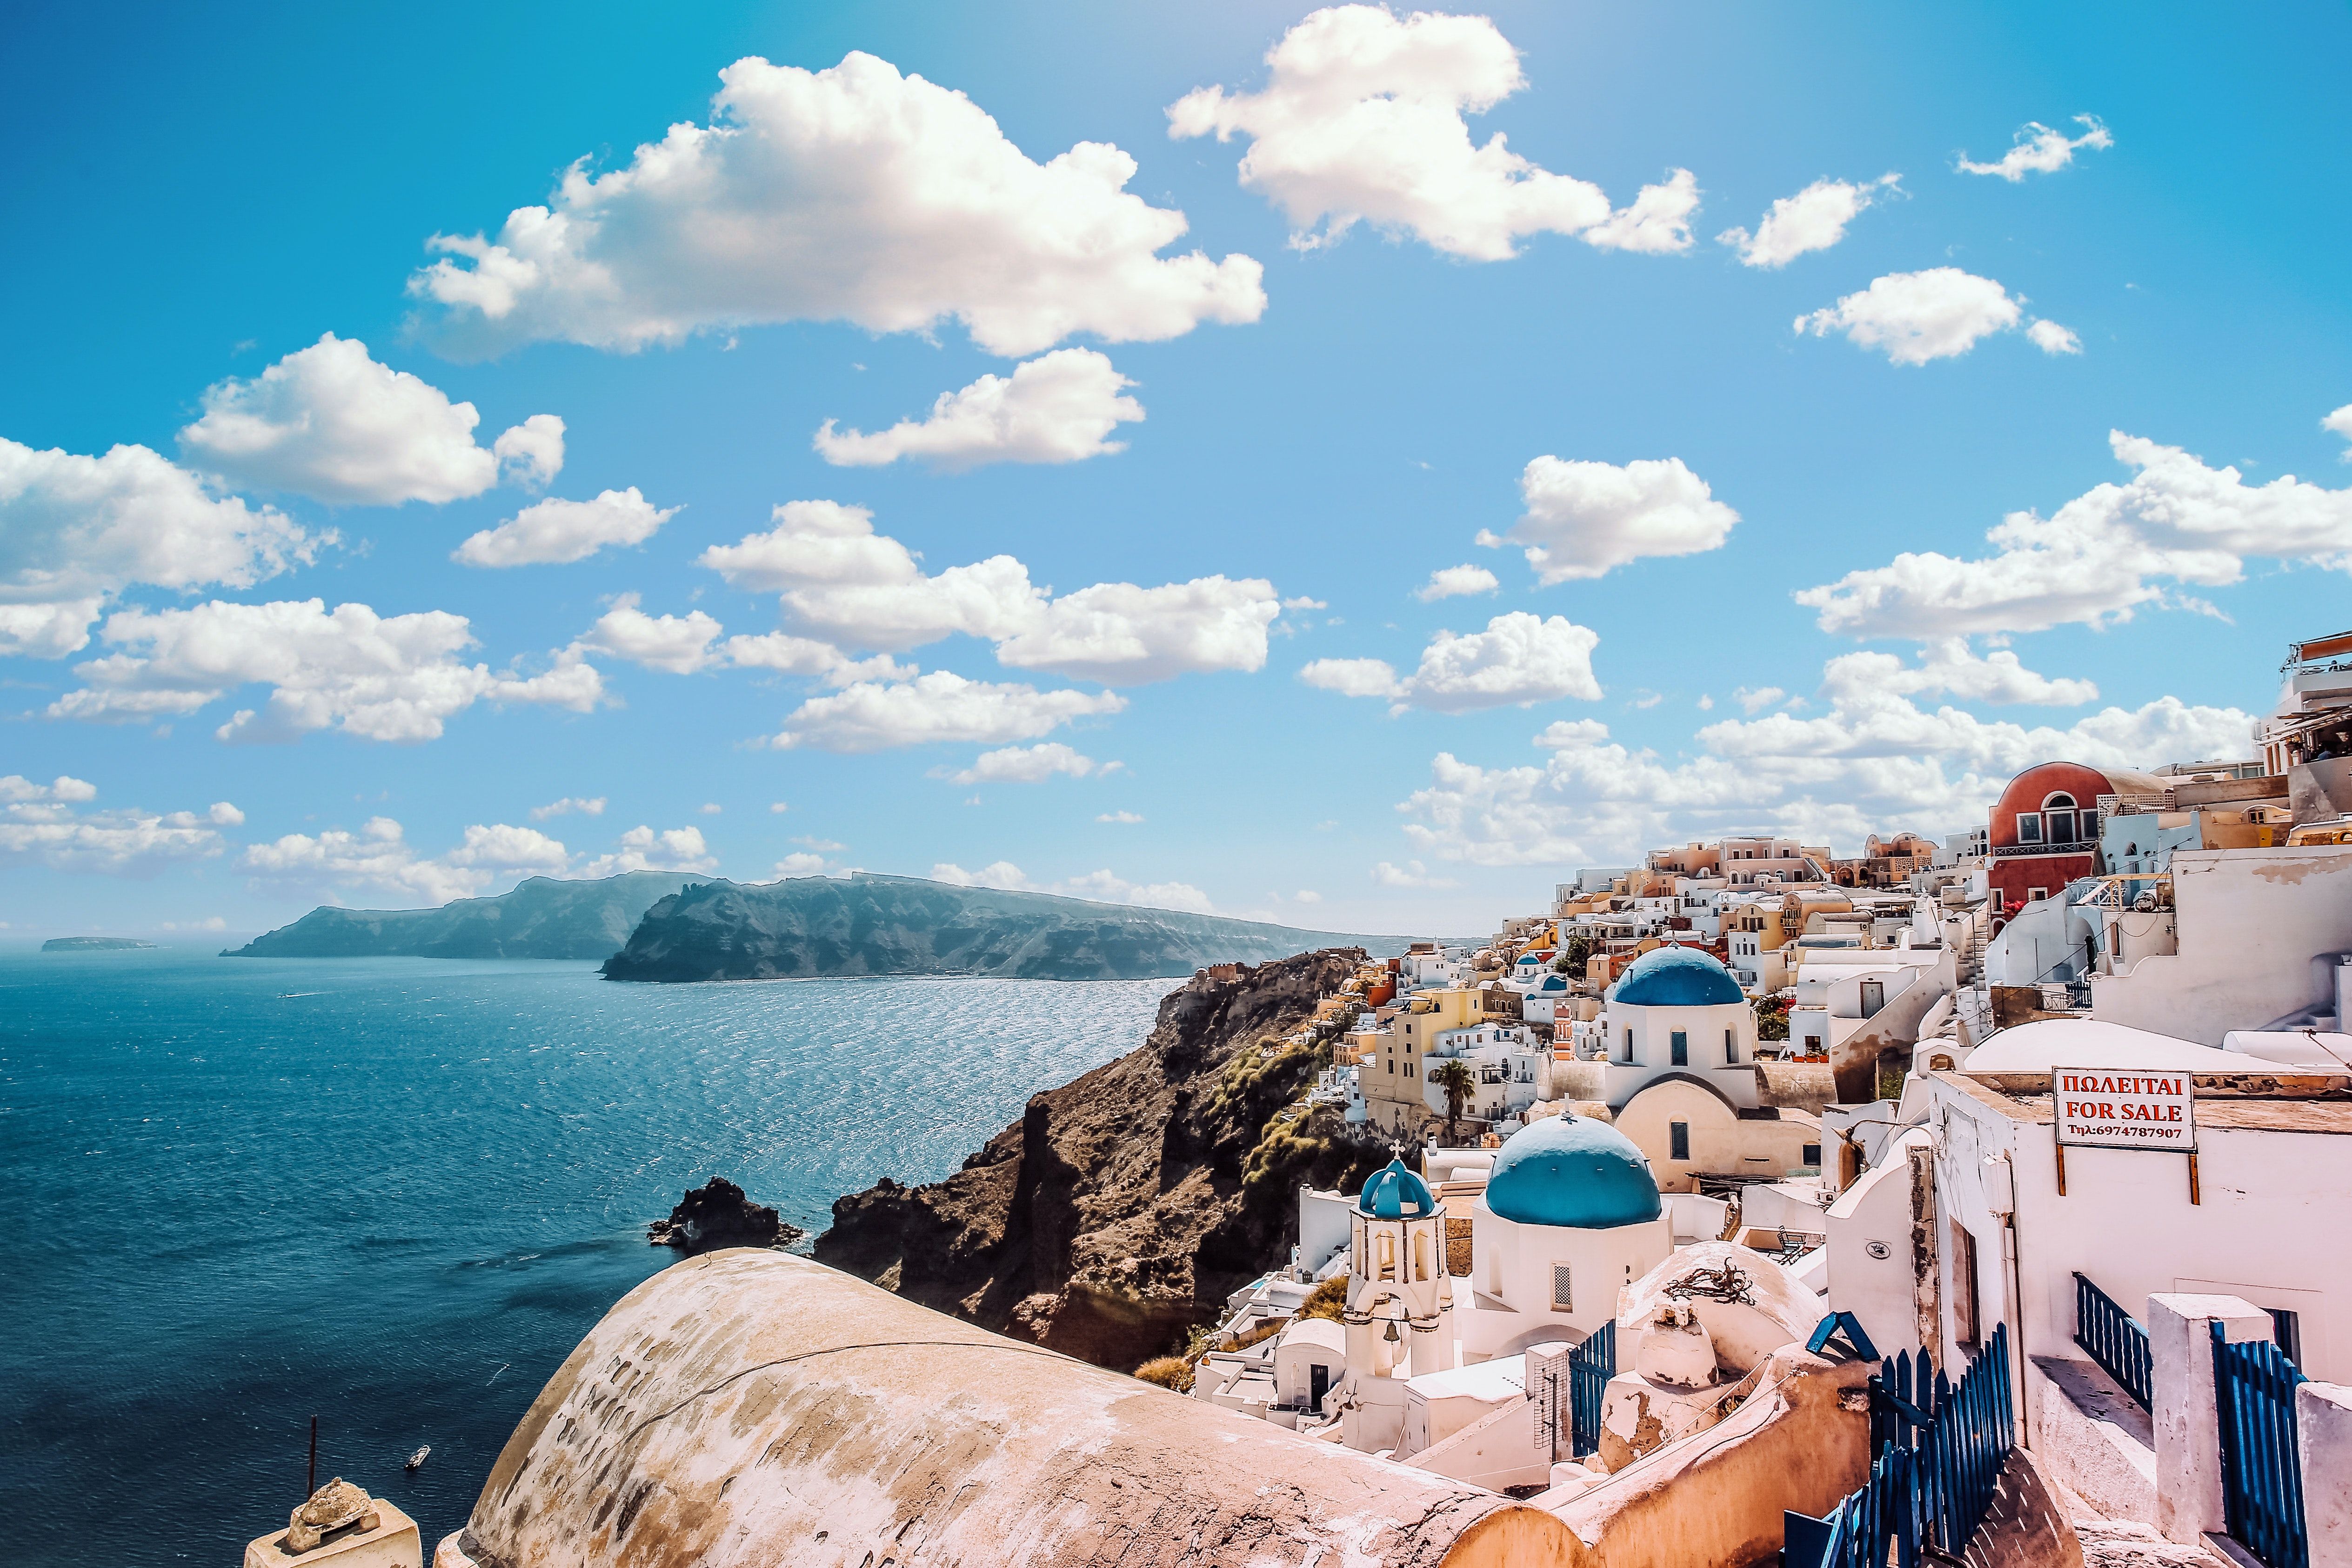 Clouds over the houses and blue-domed buildings in Santorini, Greece